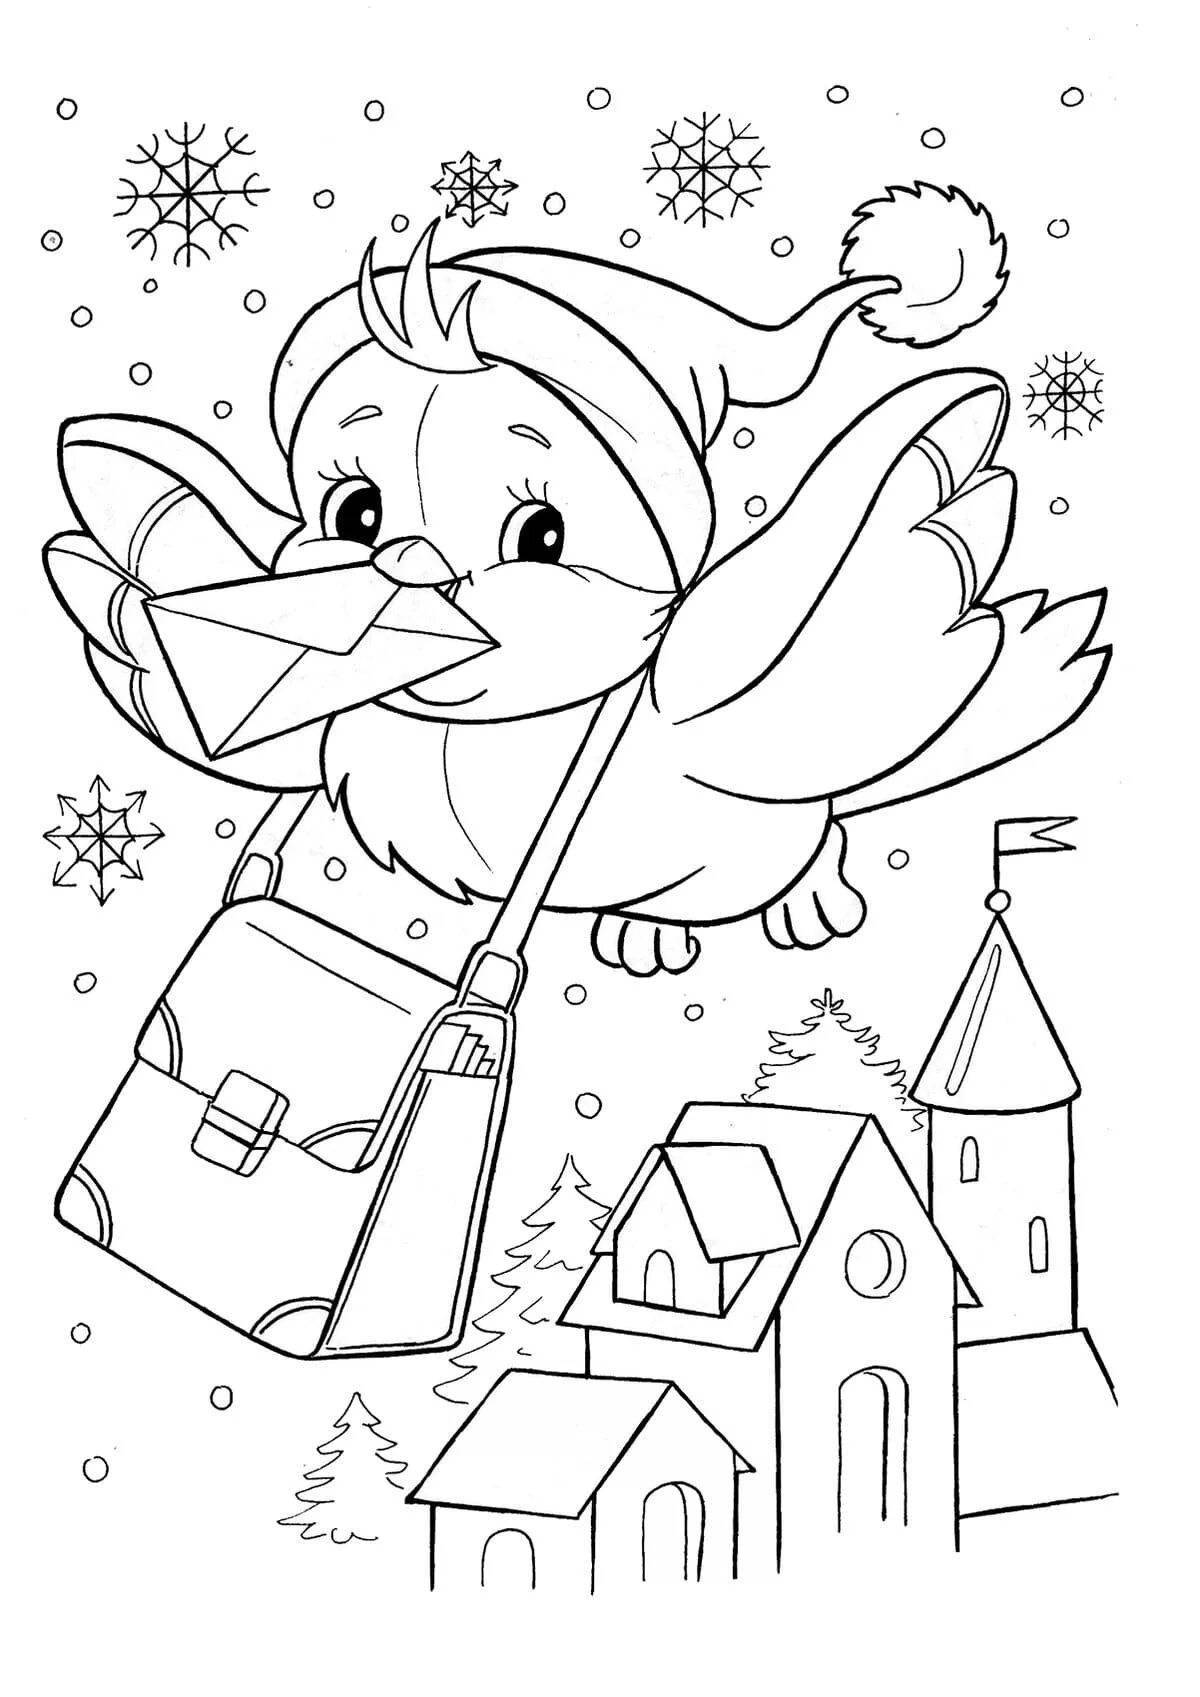 Bright coloring book for children 6 years old winter